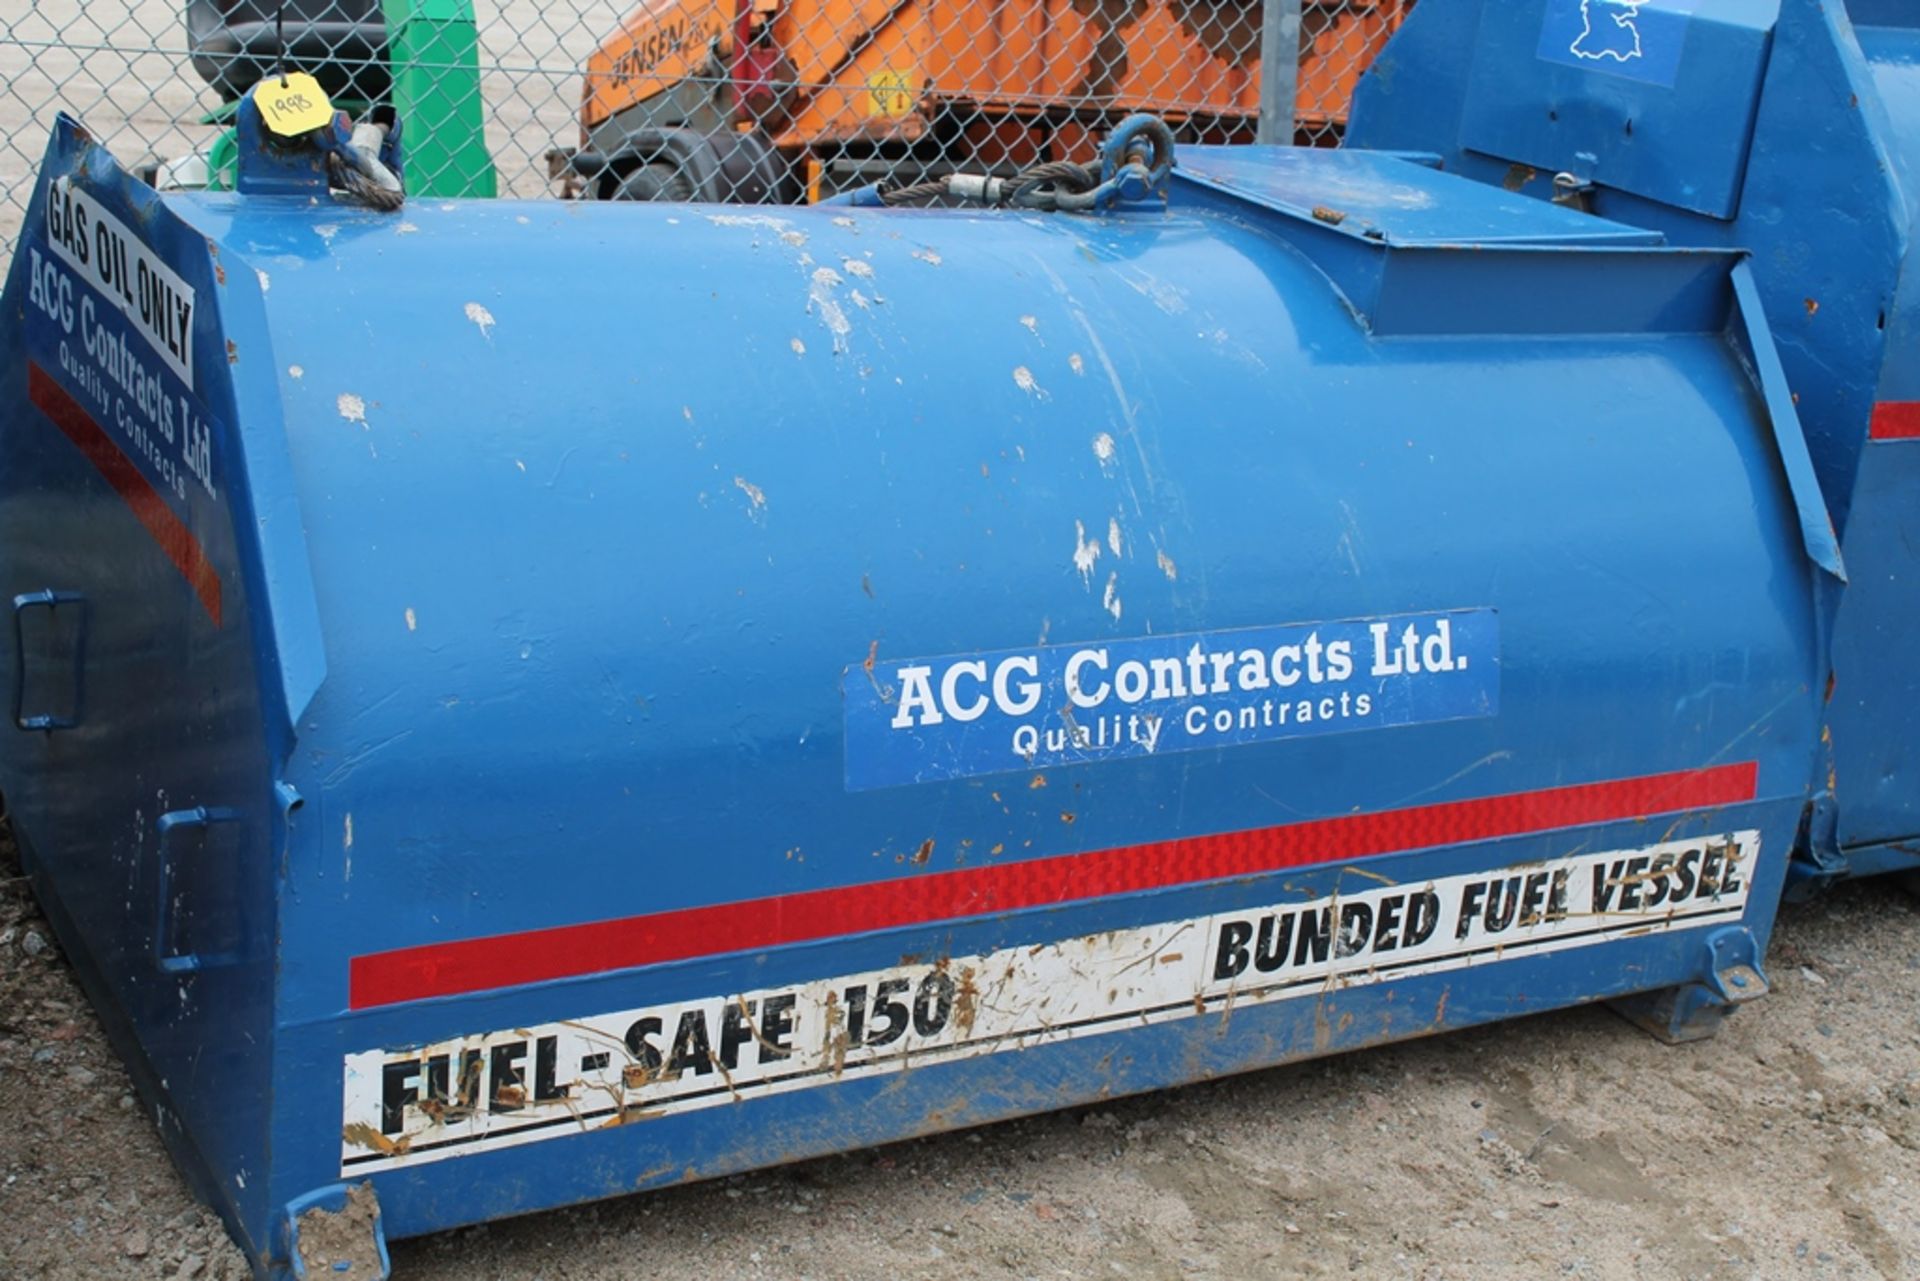 FUEL-SAFE 150 BUNDED FUEL TANK - WIRE ROPE LIFT